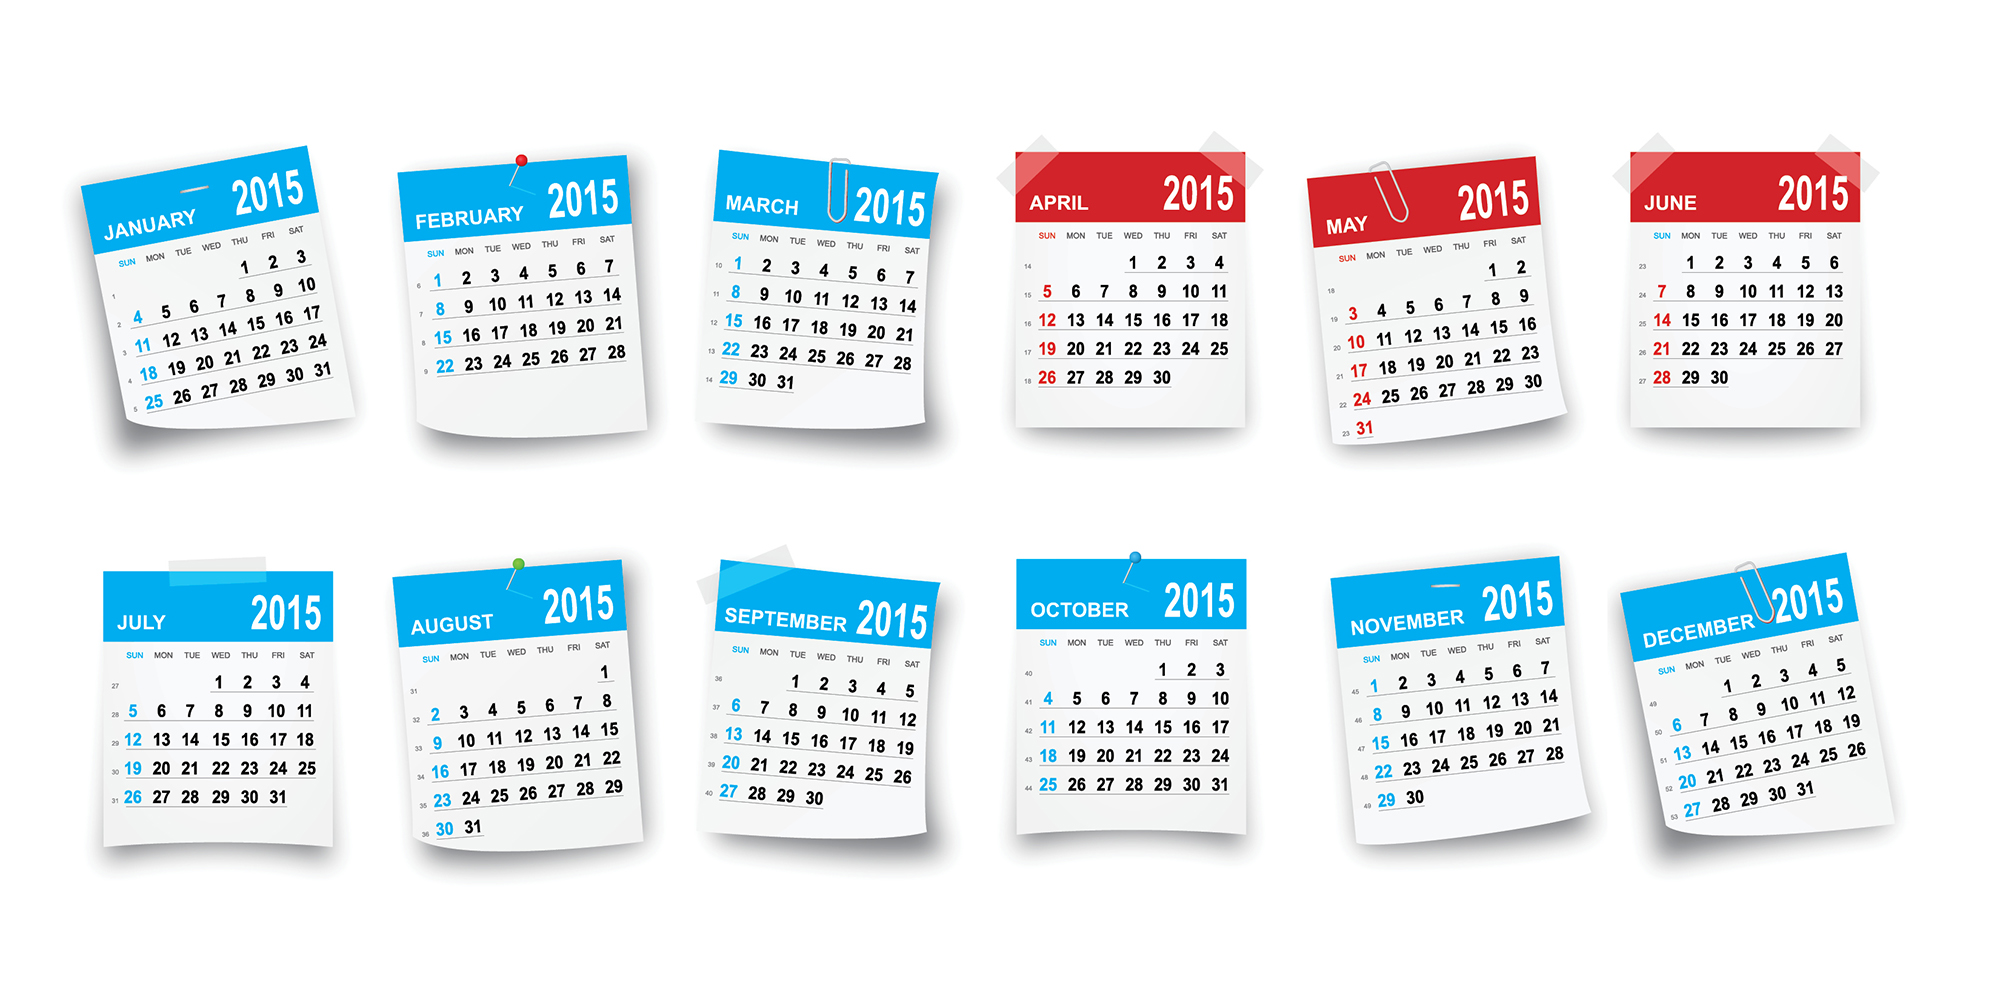 2015 Popular Selling Months | Simplifying The Market